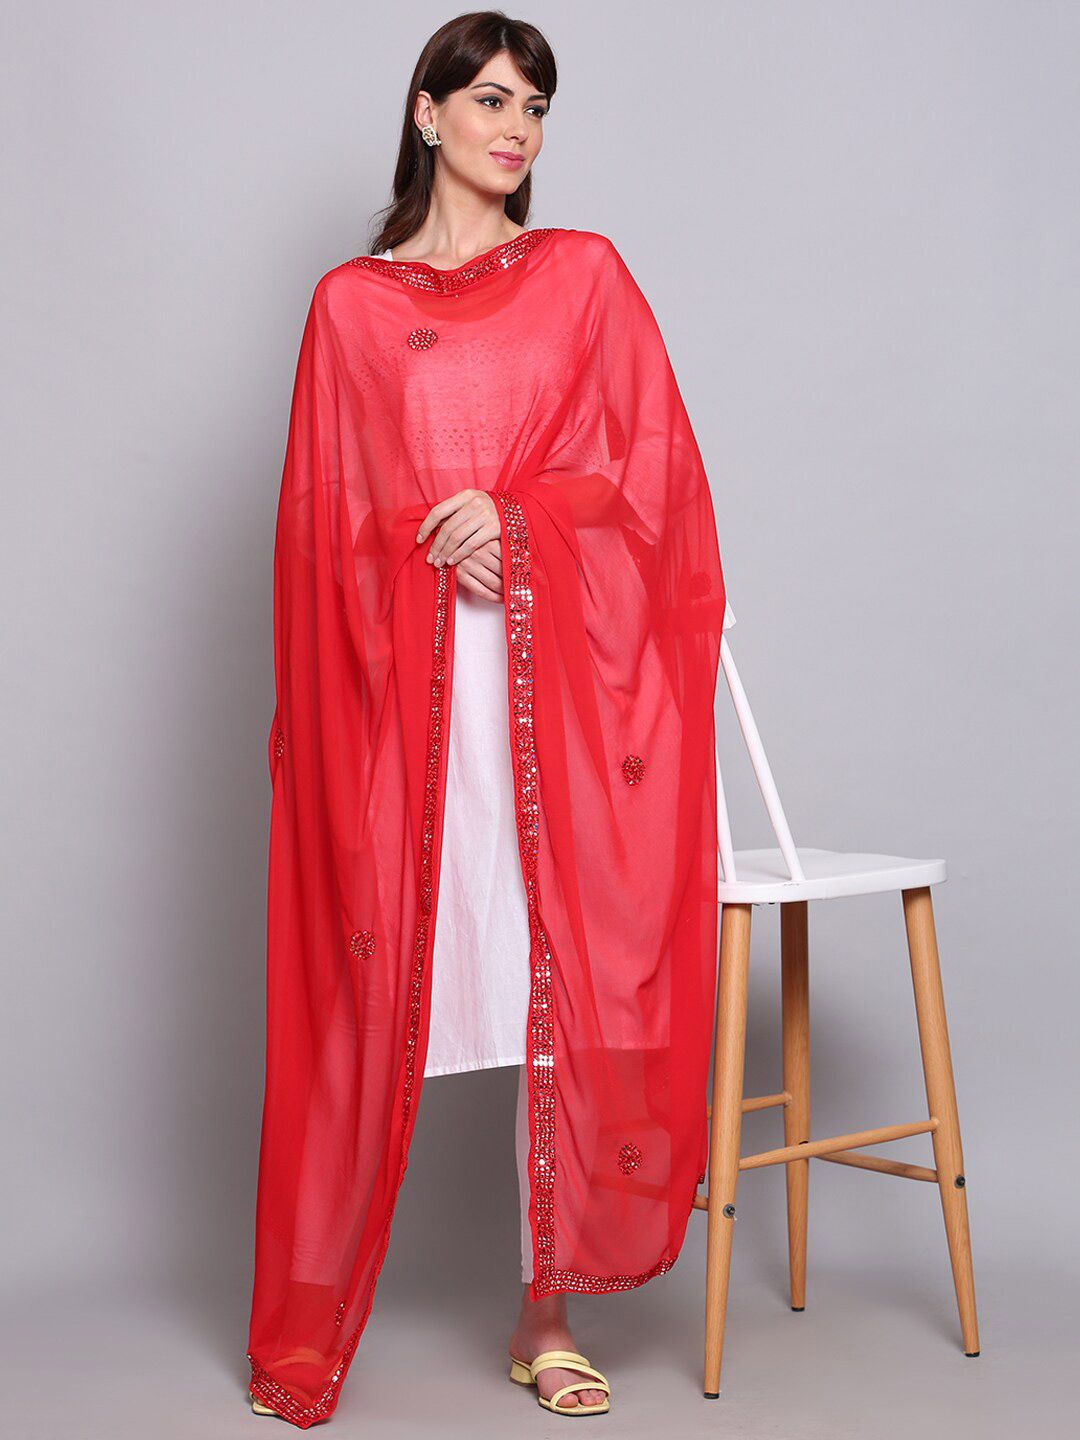 Miaz Lifestyle Red & Silver-Toned Ethnic Motifs Woven Design Dupatta with Mirror Work Price in India